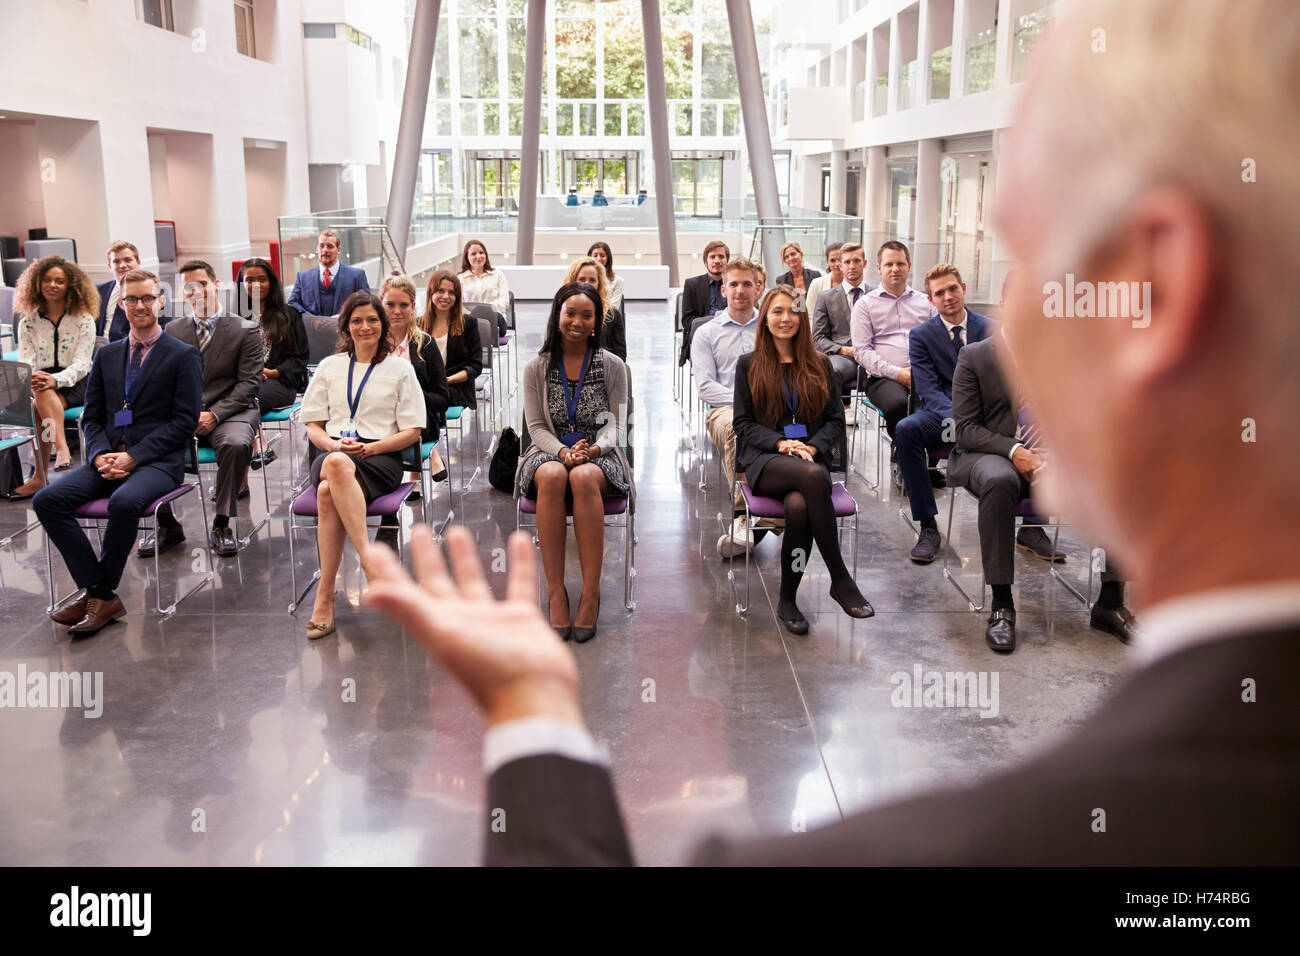 Audience Applauding Speaker After Conference Presentation Stock Photo